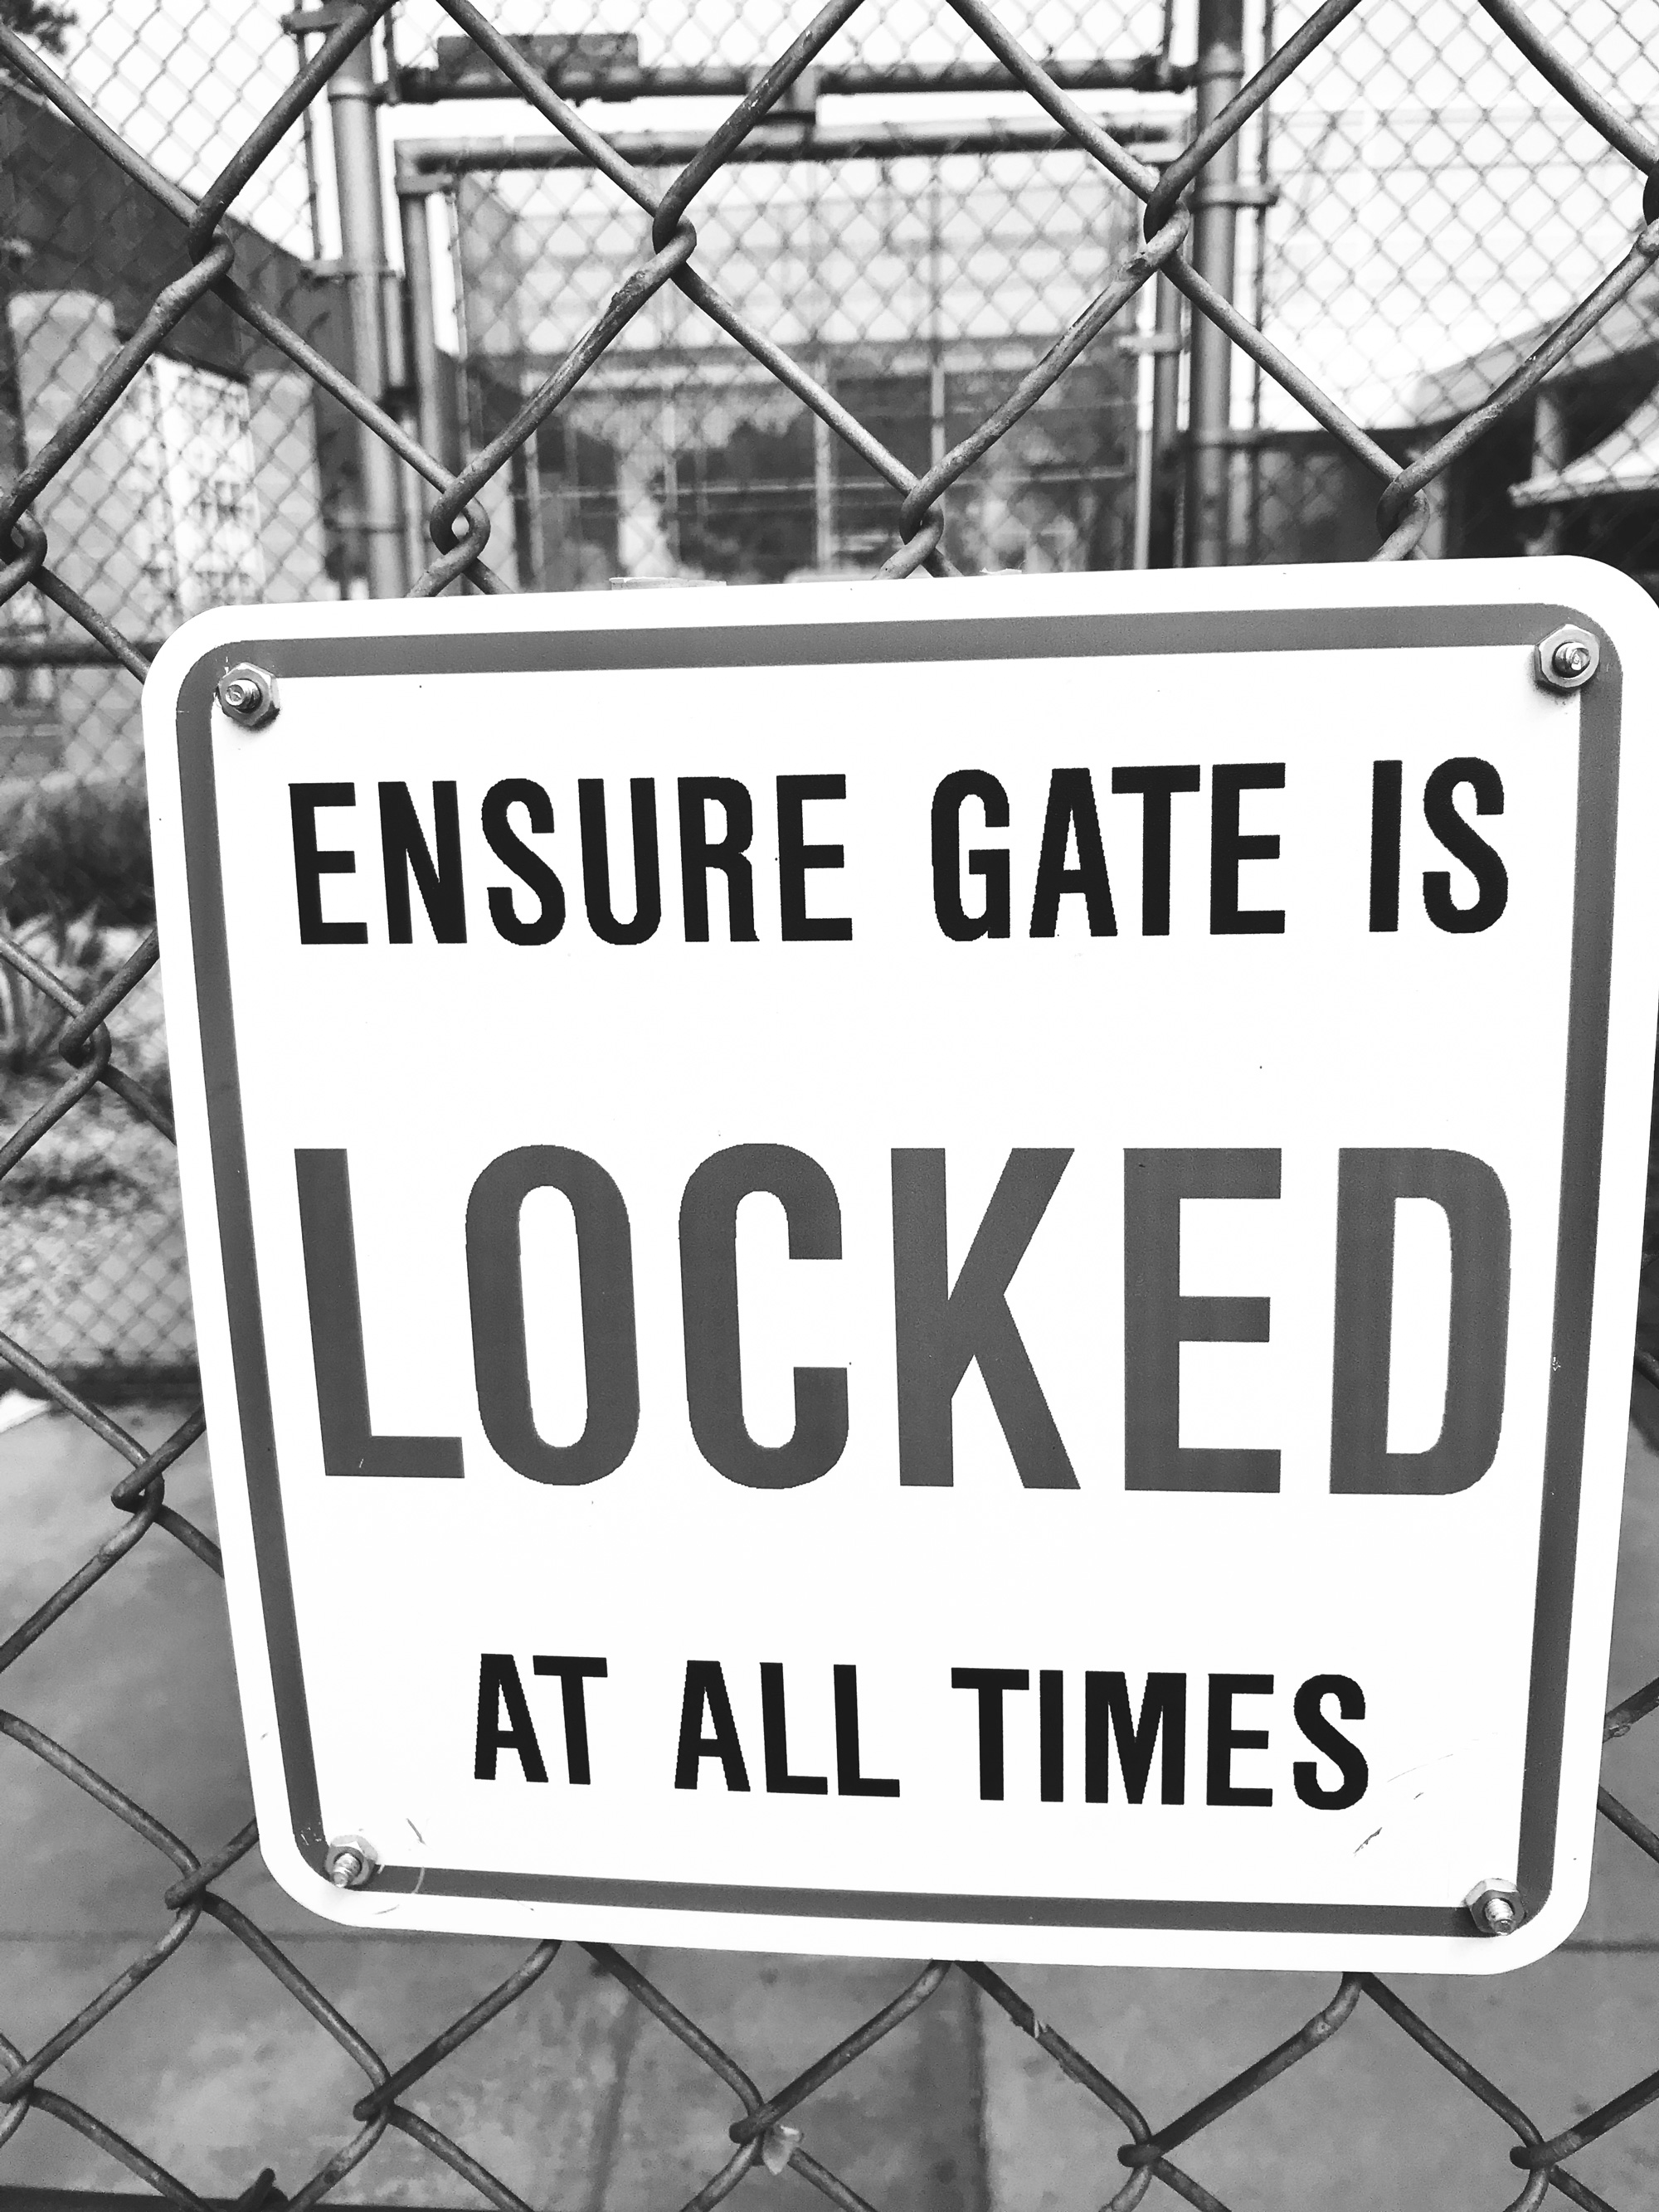 photo of a sign that reads: “Ensure gate is locked at all times.”